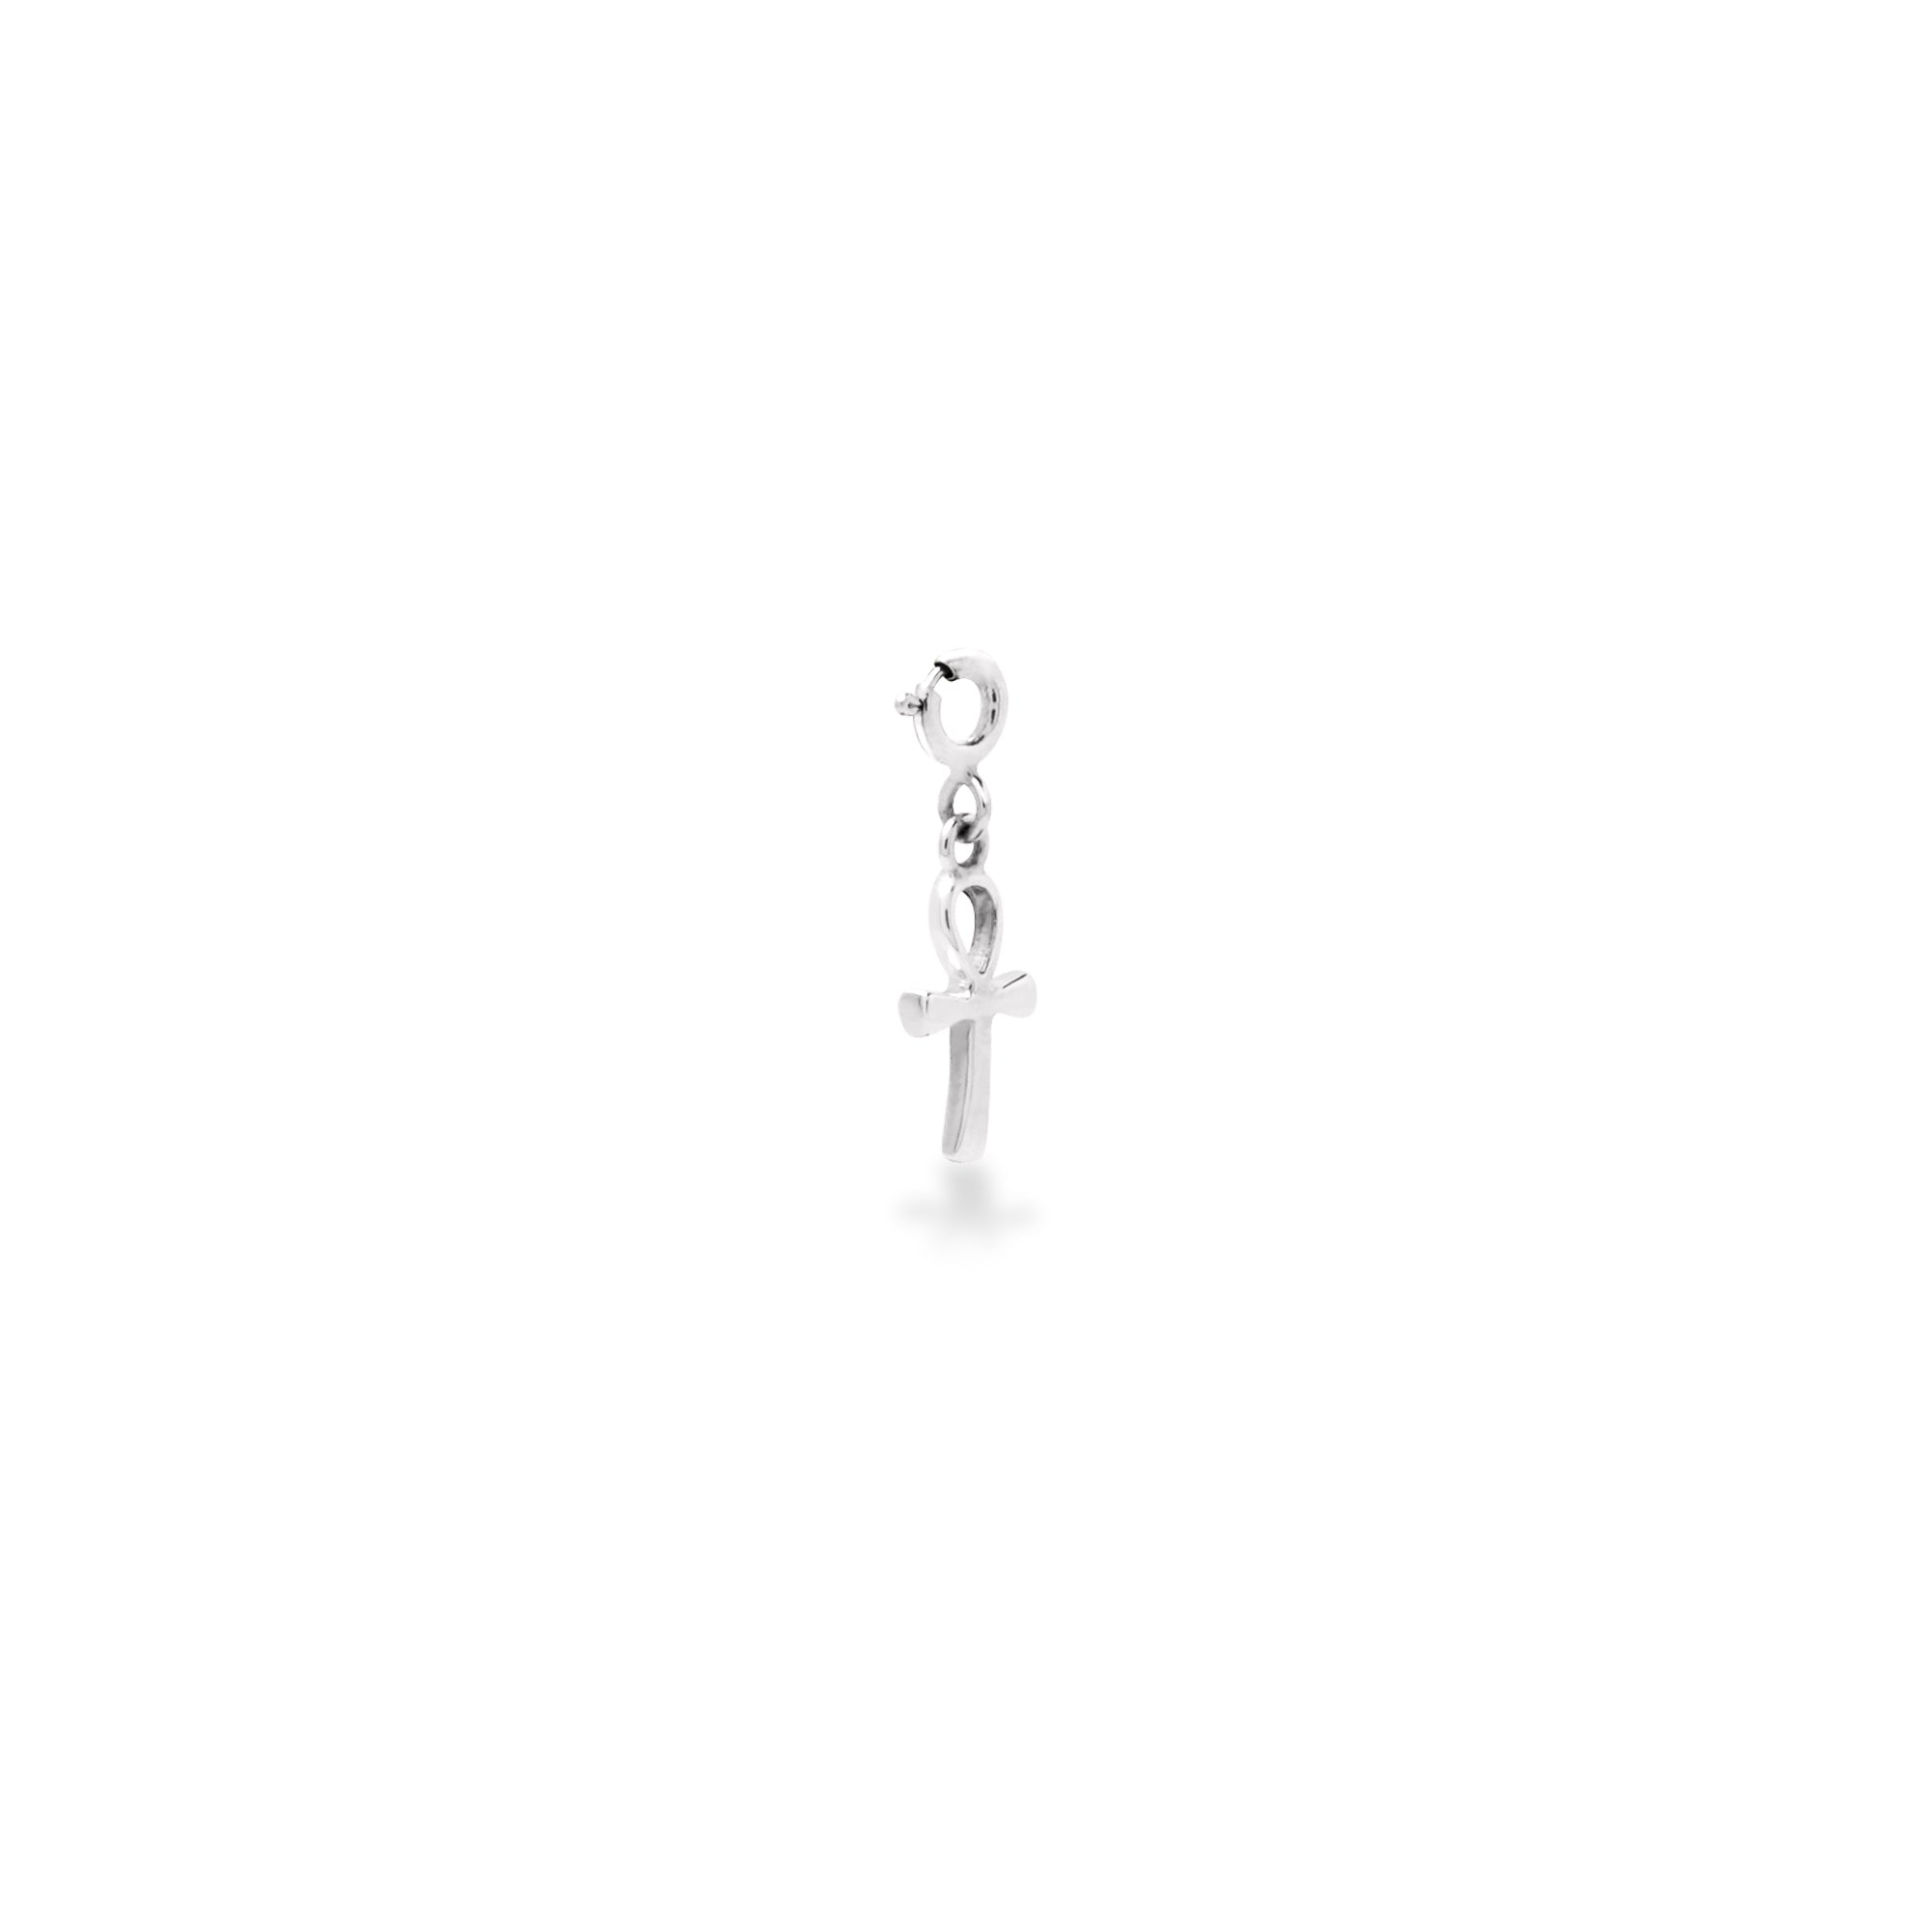 Ahnk Charm Plain in 925 Sterling Silver  (charm only)